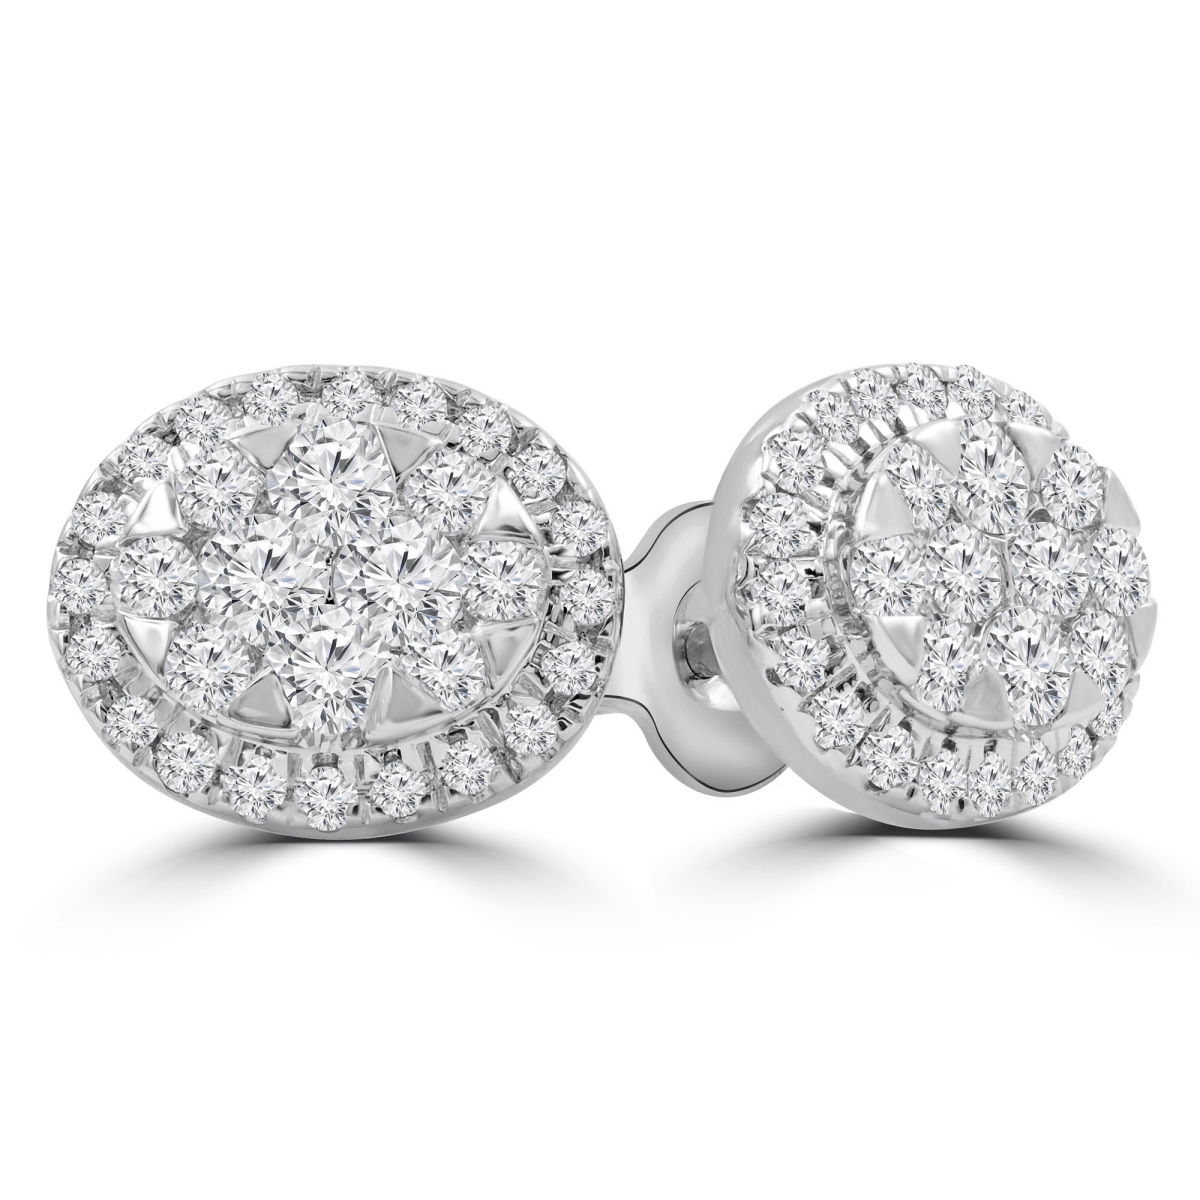 MDR210097 0.8 CTW Round Diamond Cluster Oval Halo Stud Earrings in 14K White Gold -  Majesty Diamonds